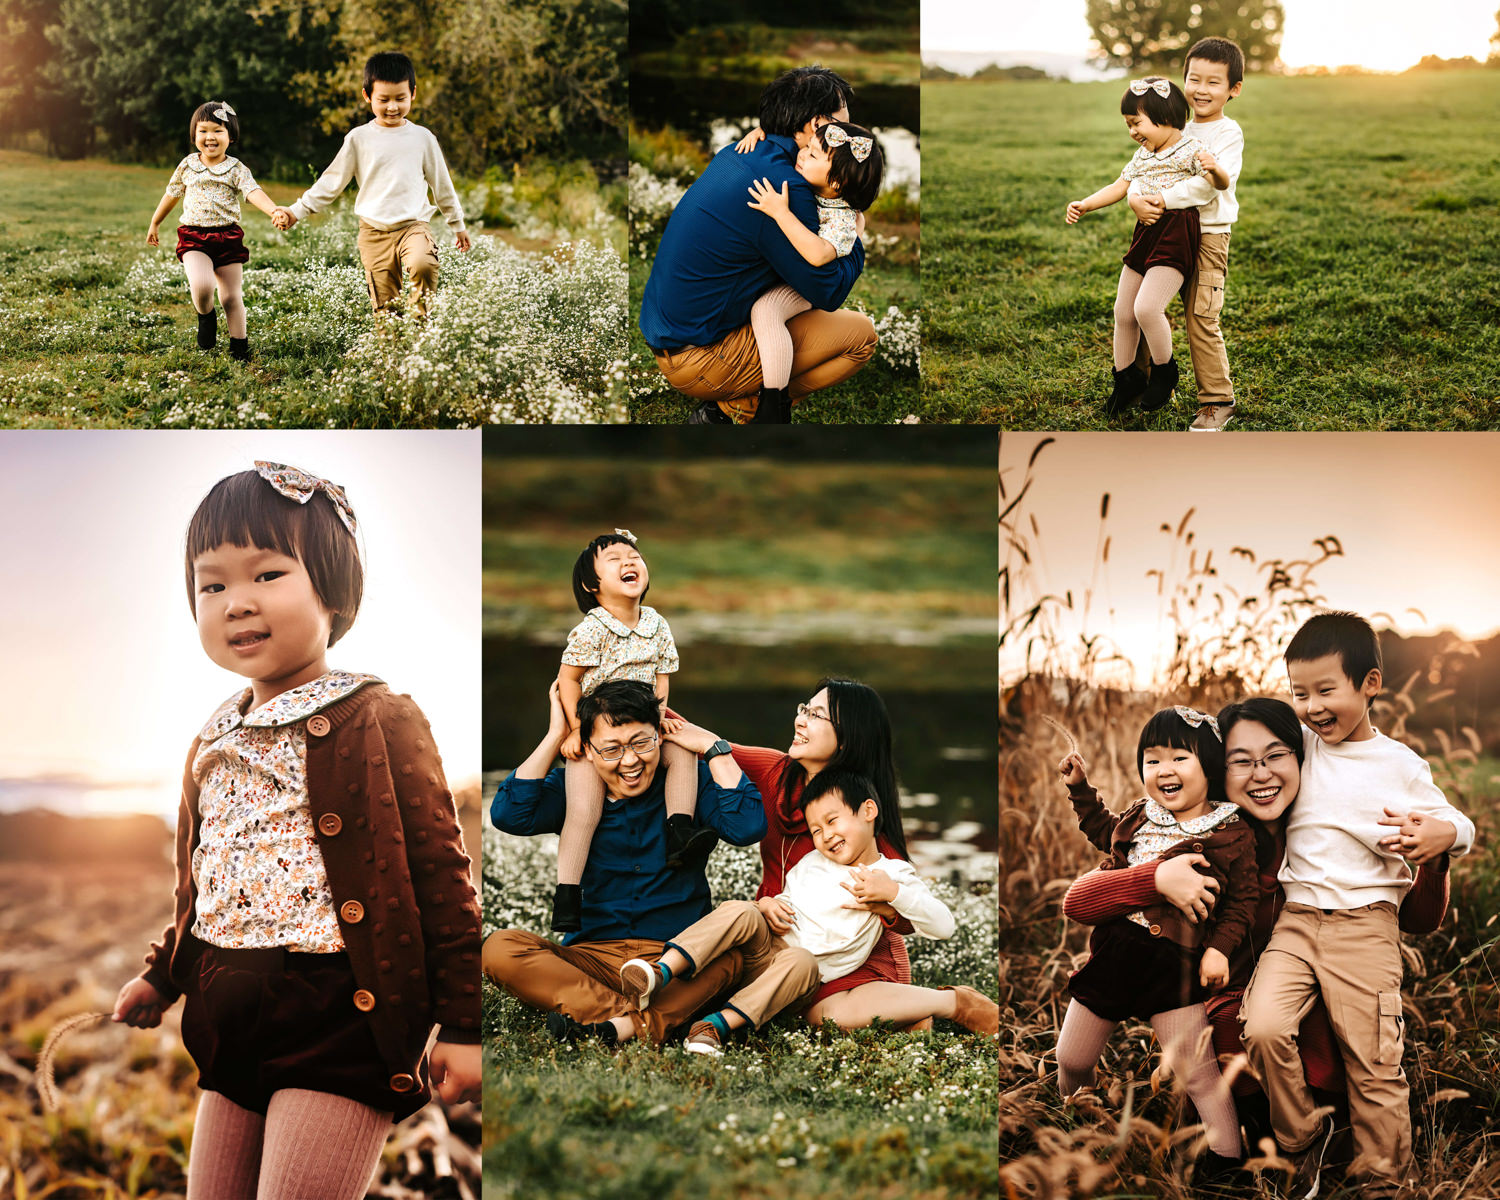 Sitting Poses for Family Sessions - The Milky Way | Outdoor family  photography, Photography poses family, Family studio photography